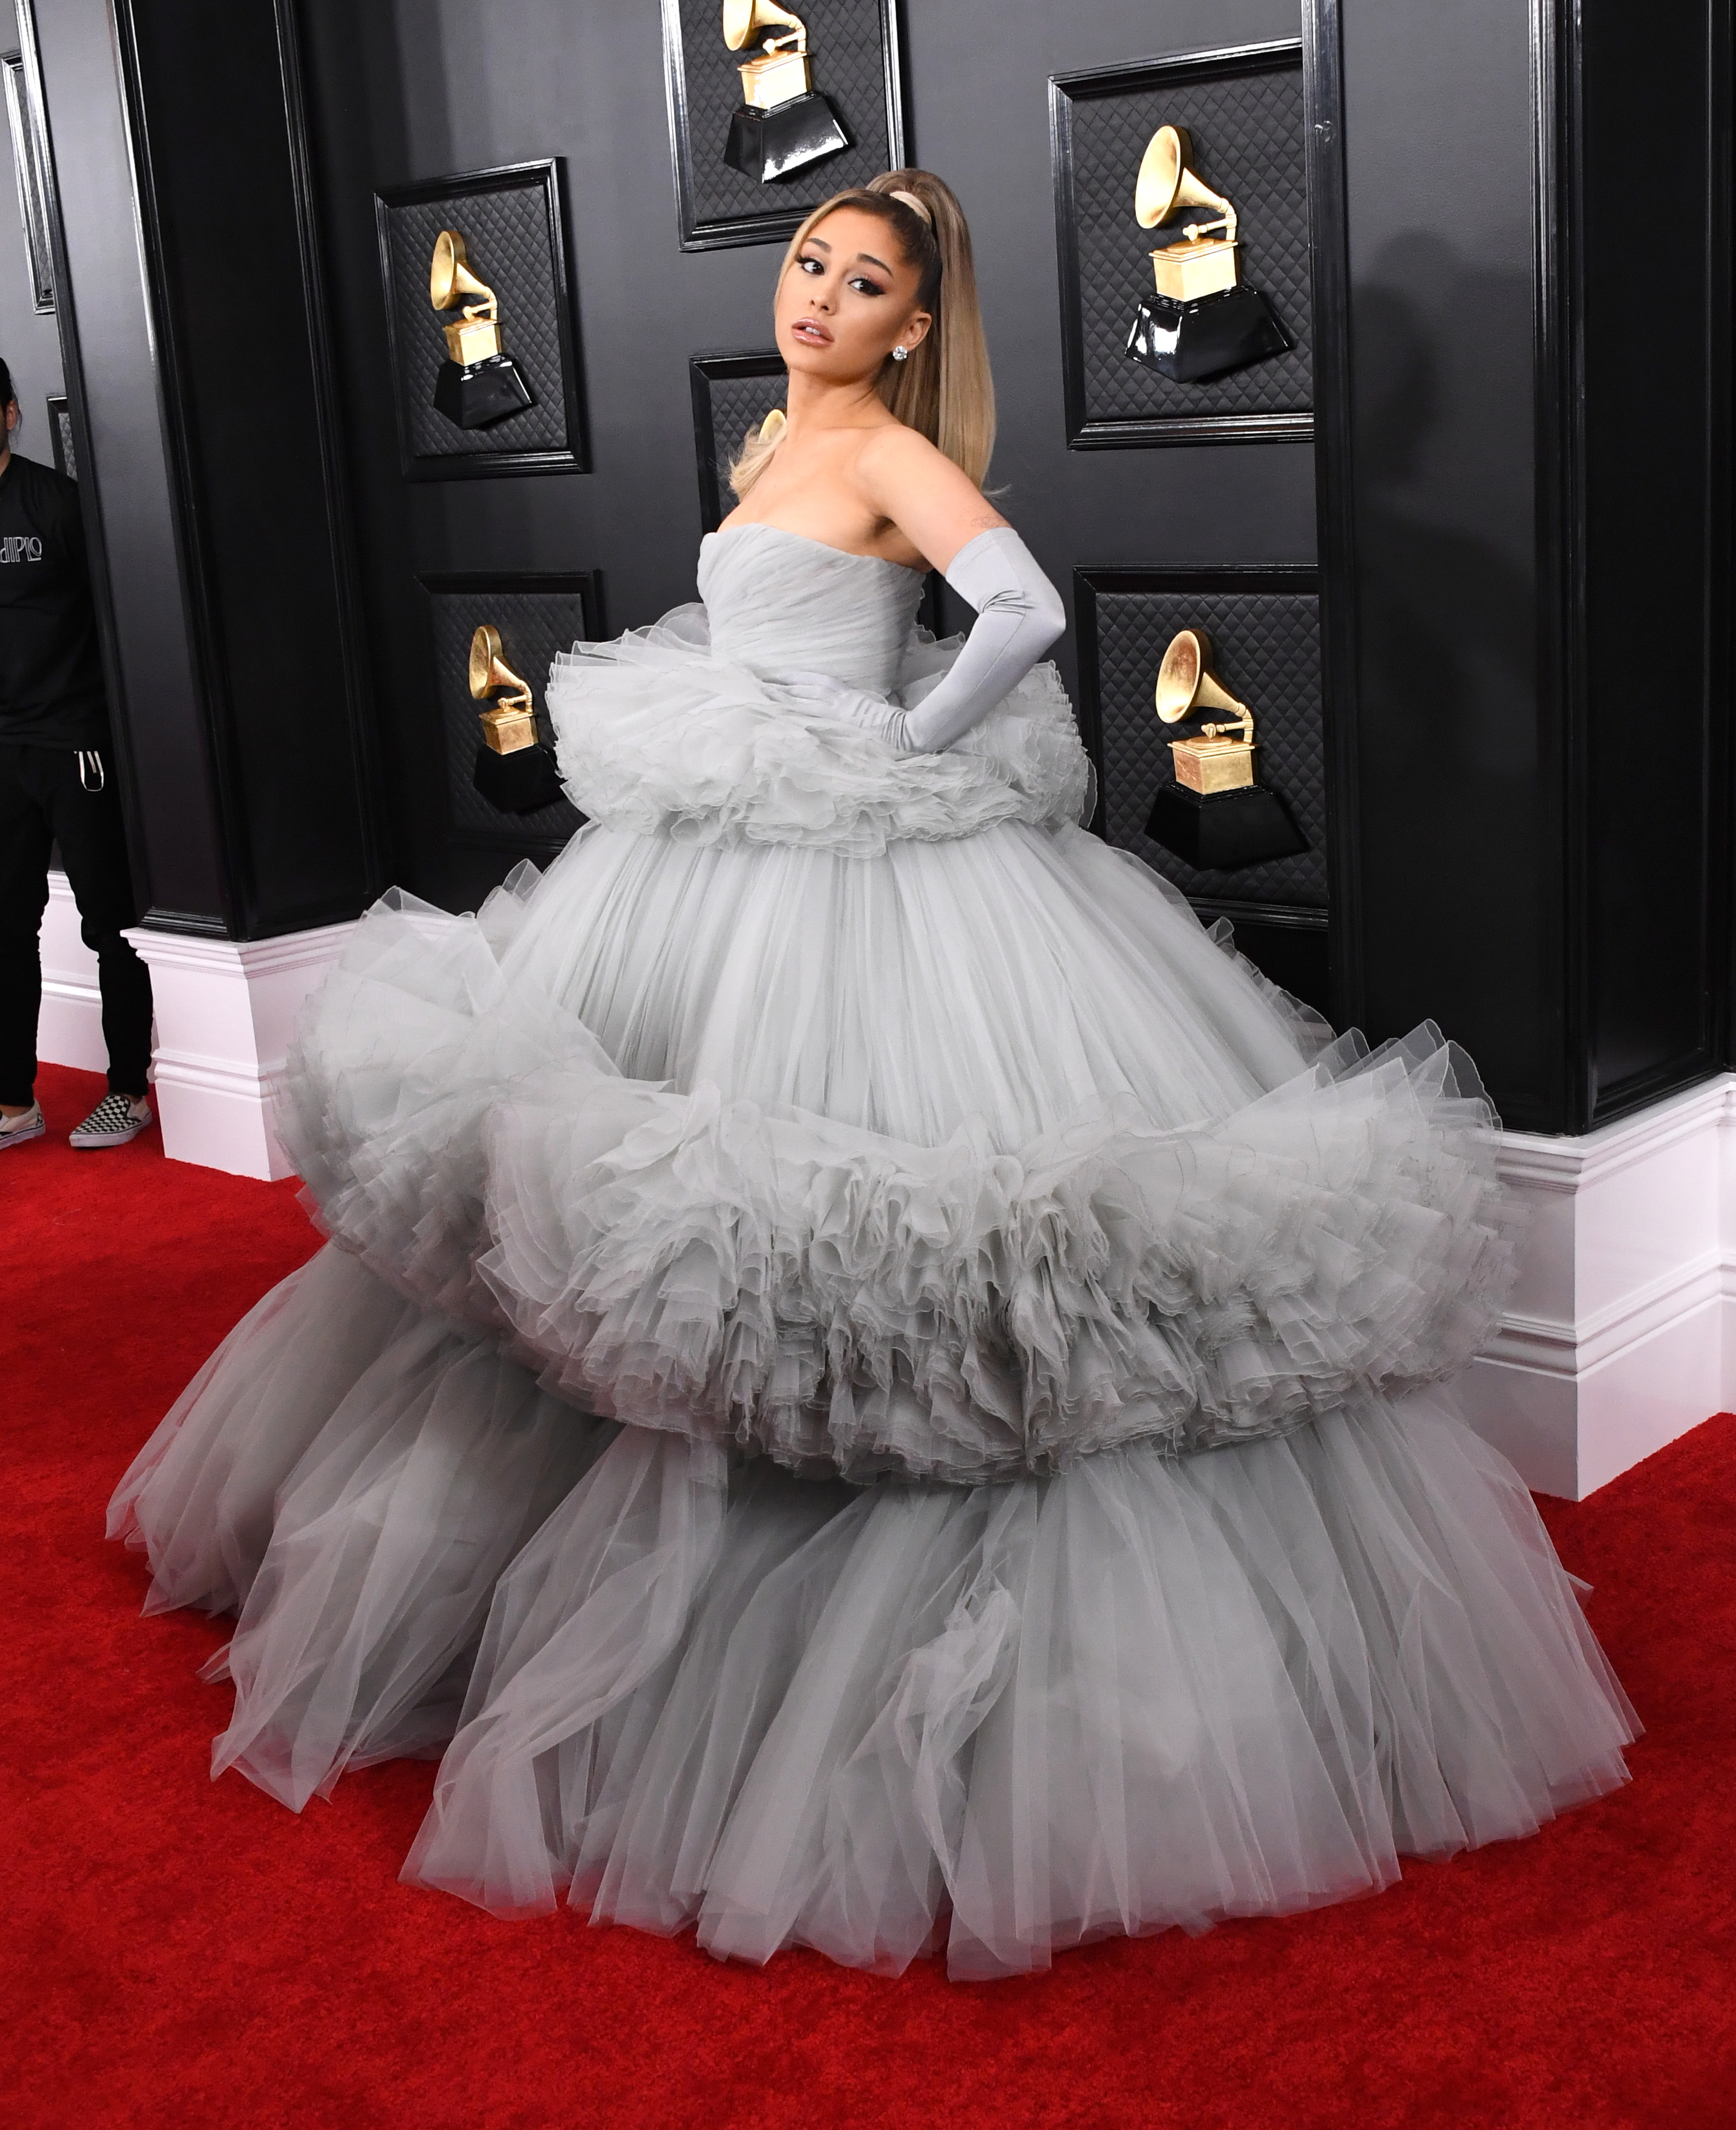 Ariana Grande wearing a grey tulle dress from Giambattista Valli Haute Couture at the Grammy Awards in 2020